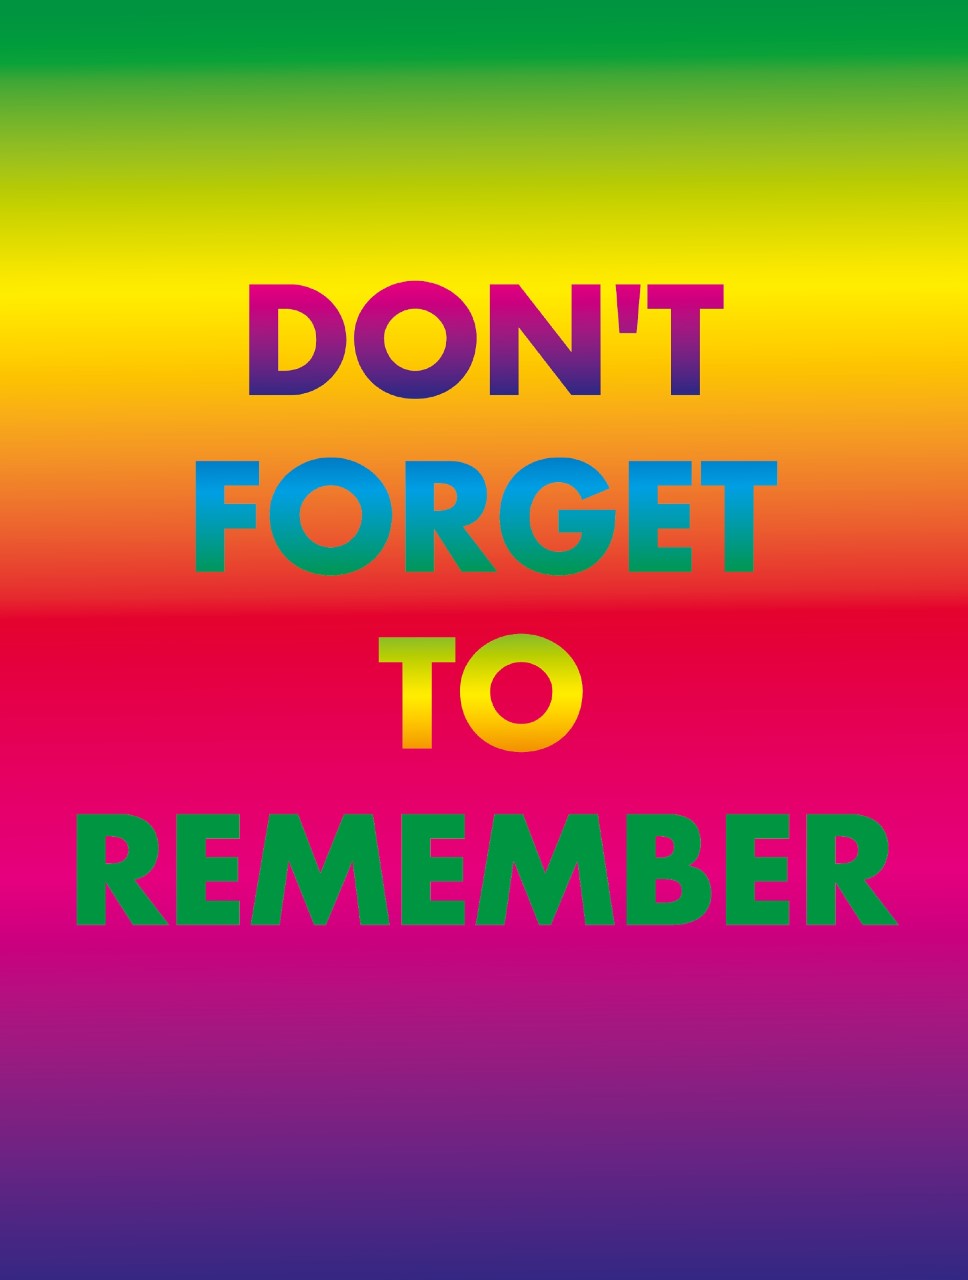 David McDiarmid Don’t Forget to Remember 1994; from the Rainbow Aphorism series 1994, National Gallery of Victoria, Melbourne. Purchased 1994. © David McDiarmid/Licensed by Copyright Agency, Australia